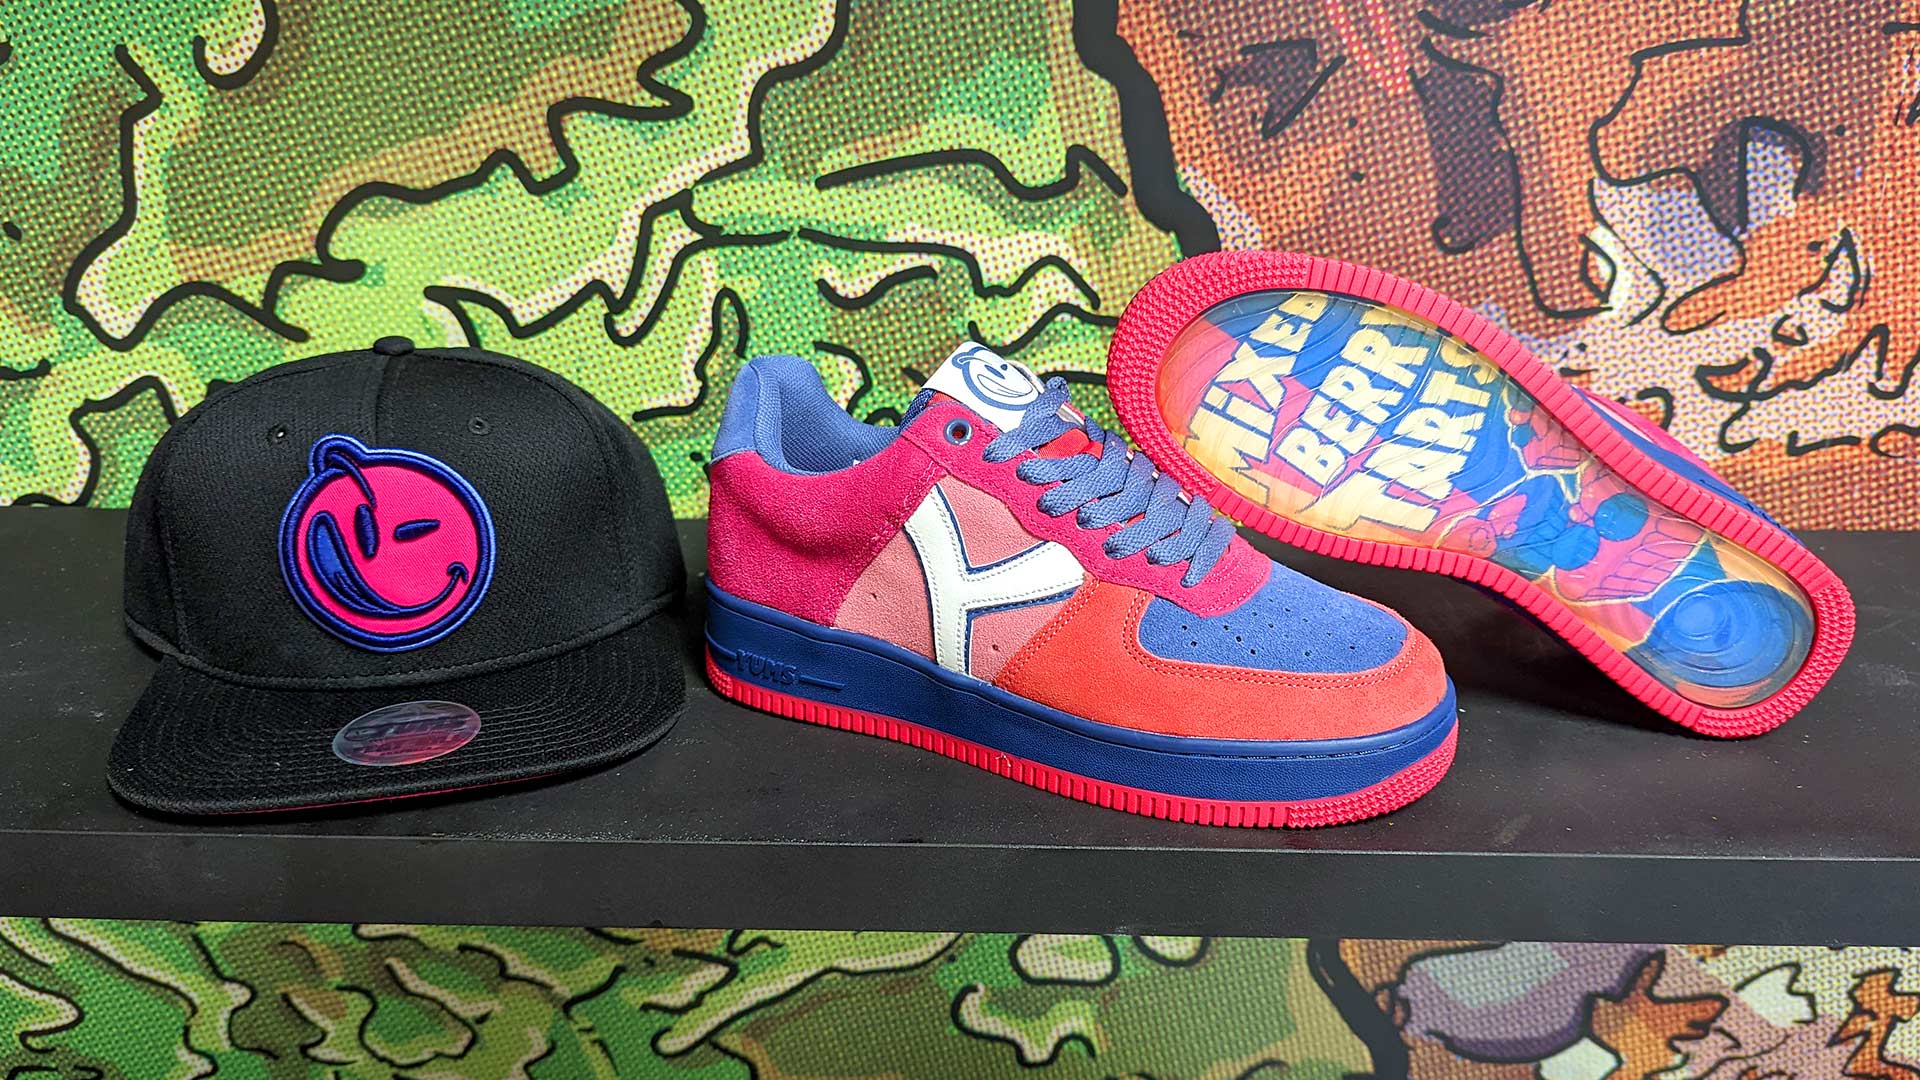 YUMS Sneakers Flavor Mixed Berry Tarts at Dope Street Shoes